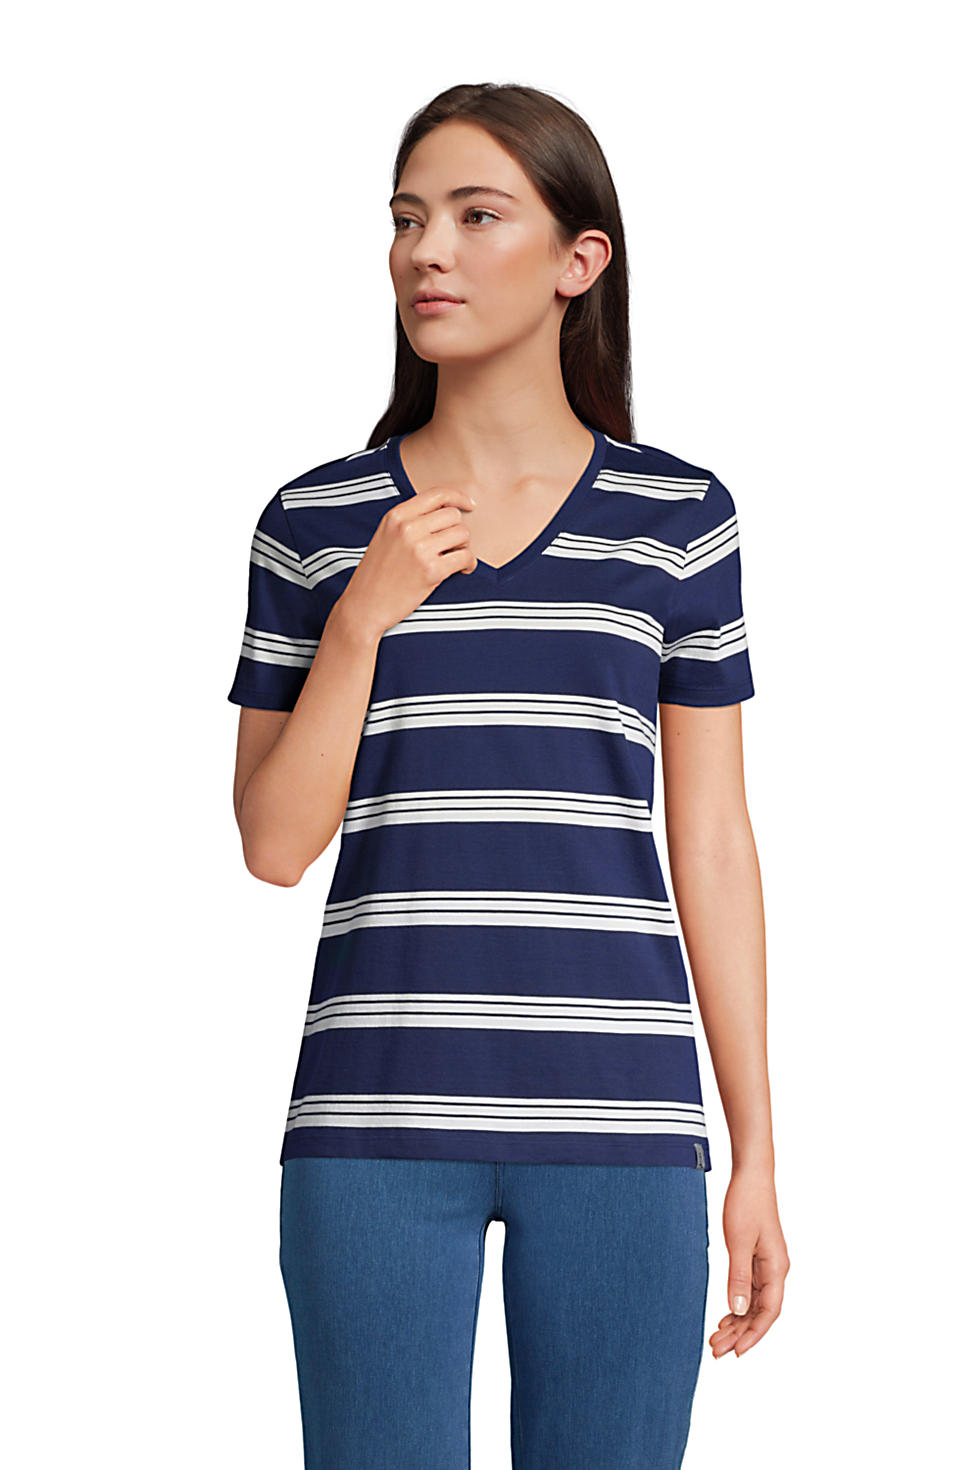 Lands’ End: Online Only! 40% Off Full-price Styles